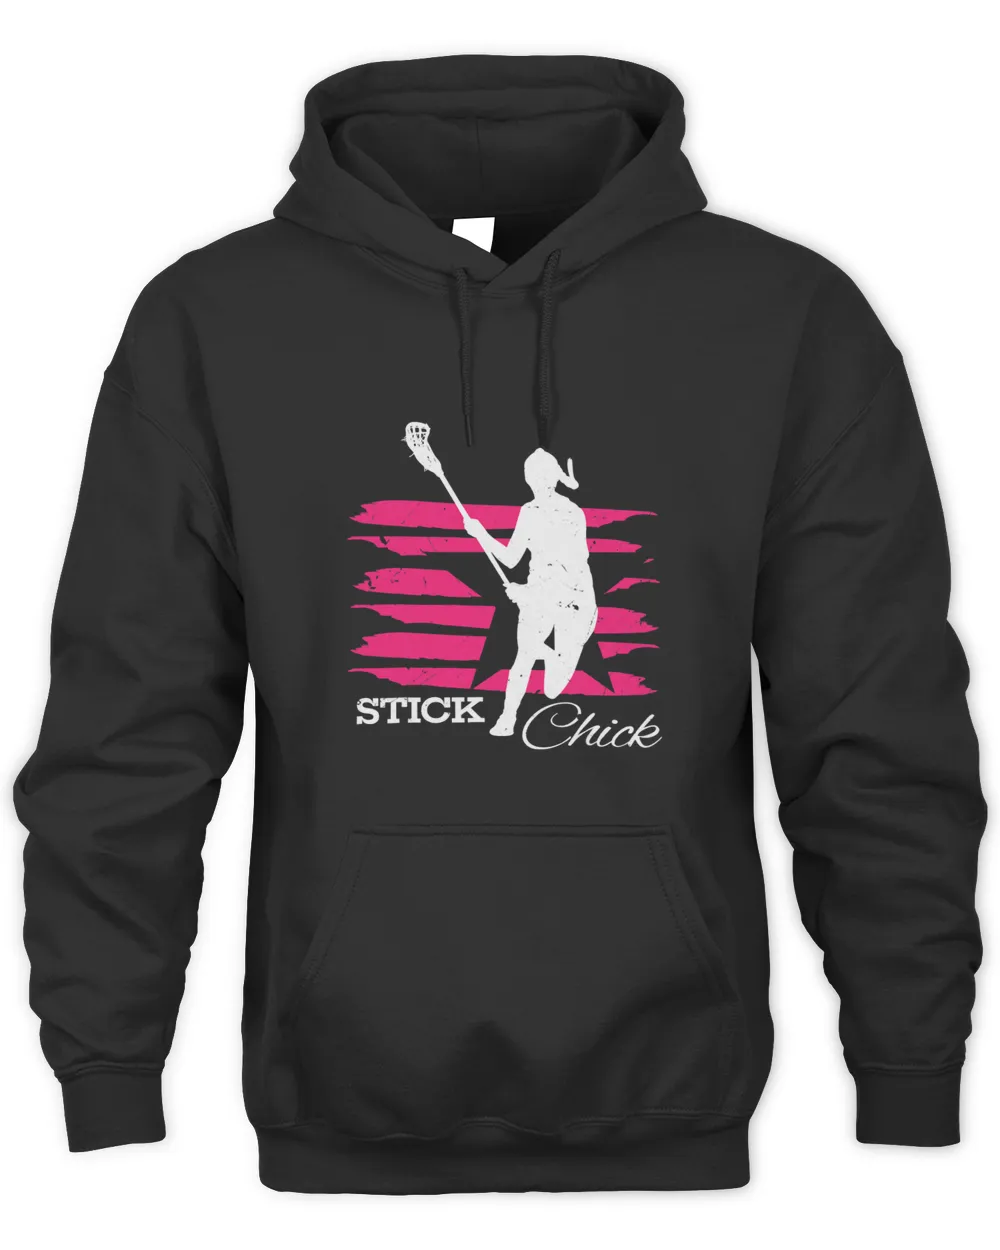 Stick Chick Womens Lacrosse Shirt for Girls Lacrosse Player 3